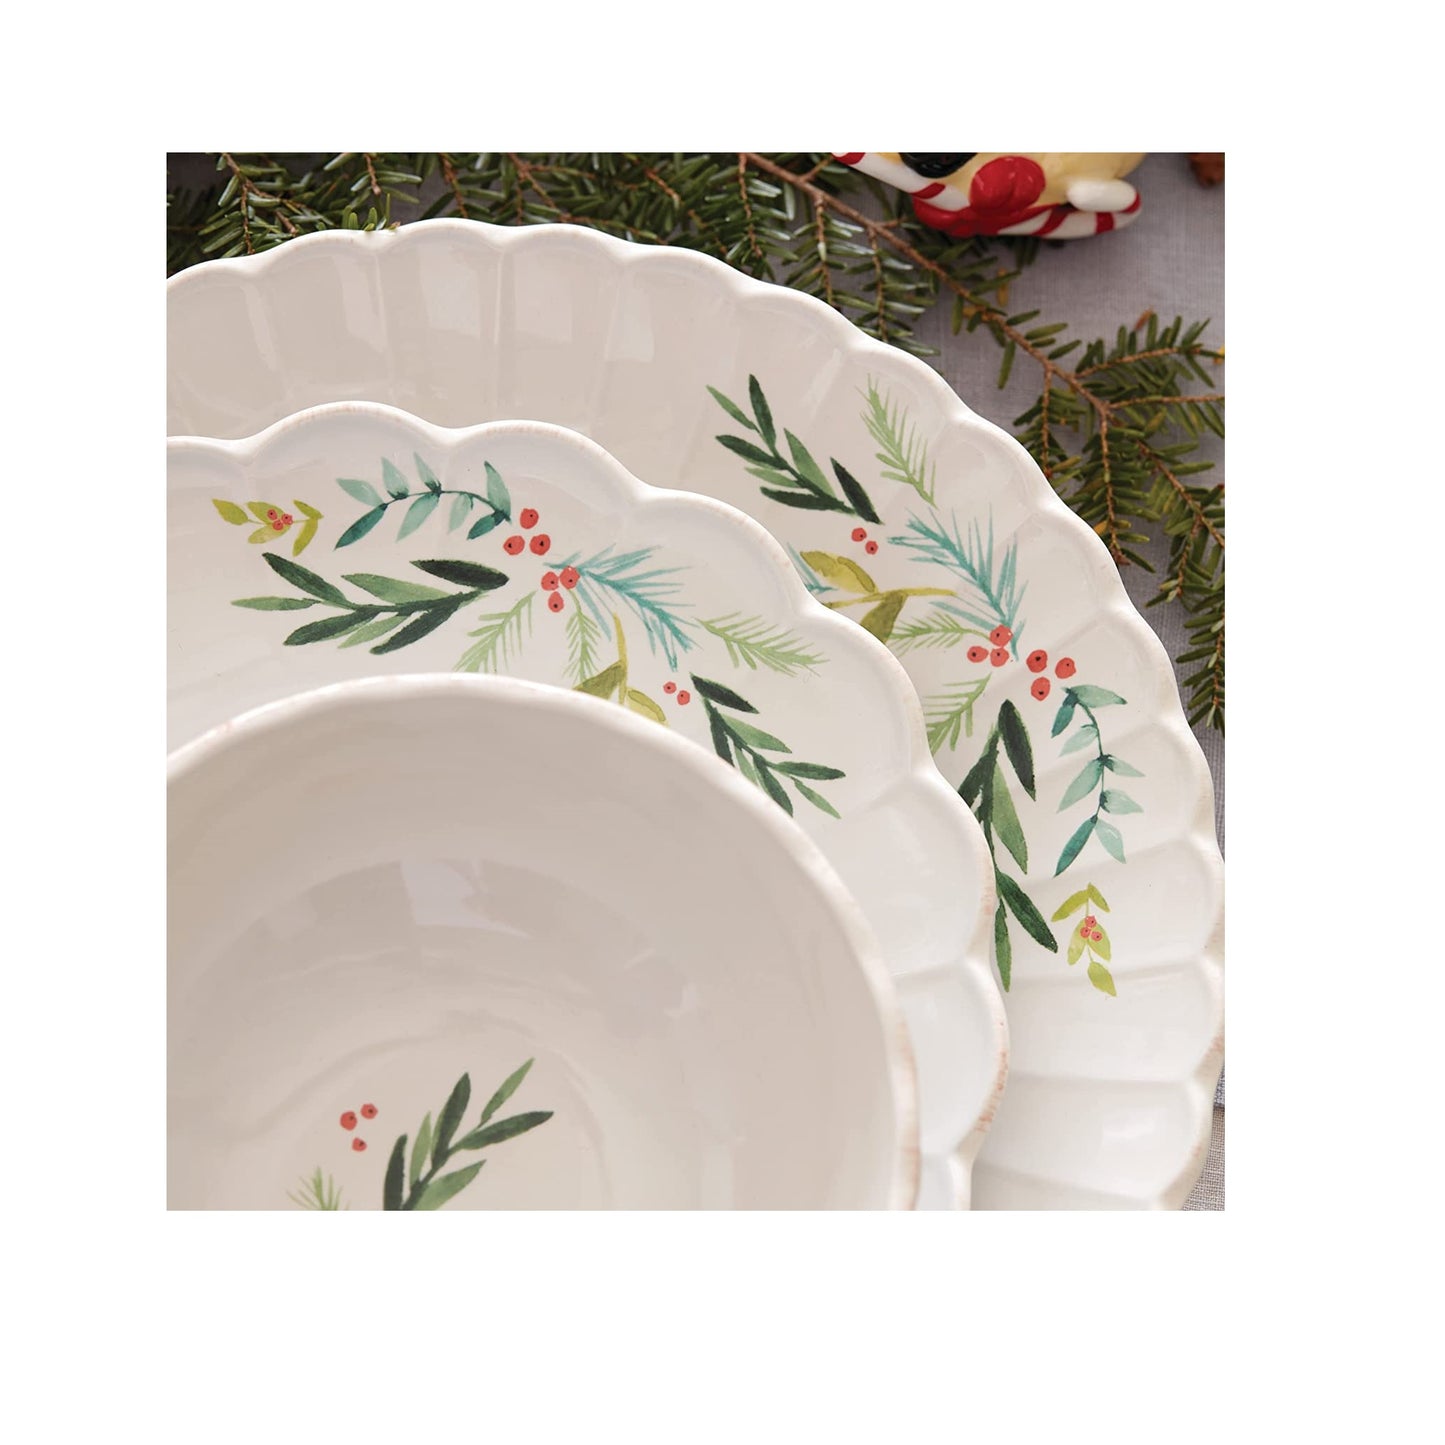 French Perle Berry Accent Plates, Set of 4 By Lenox